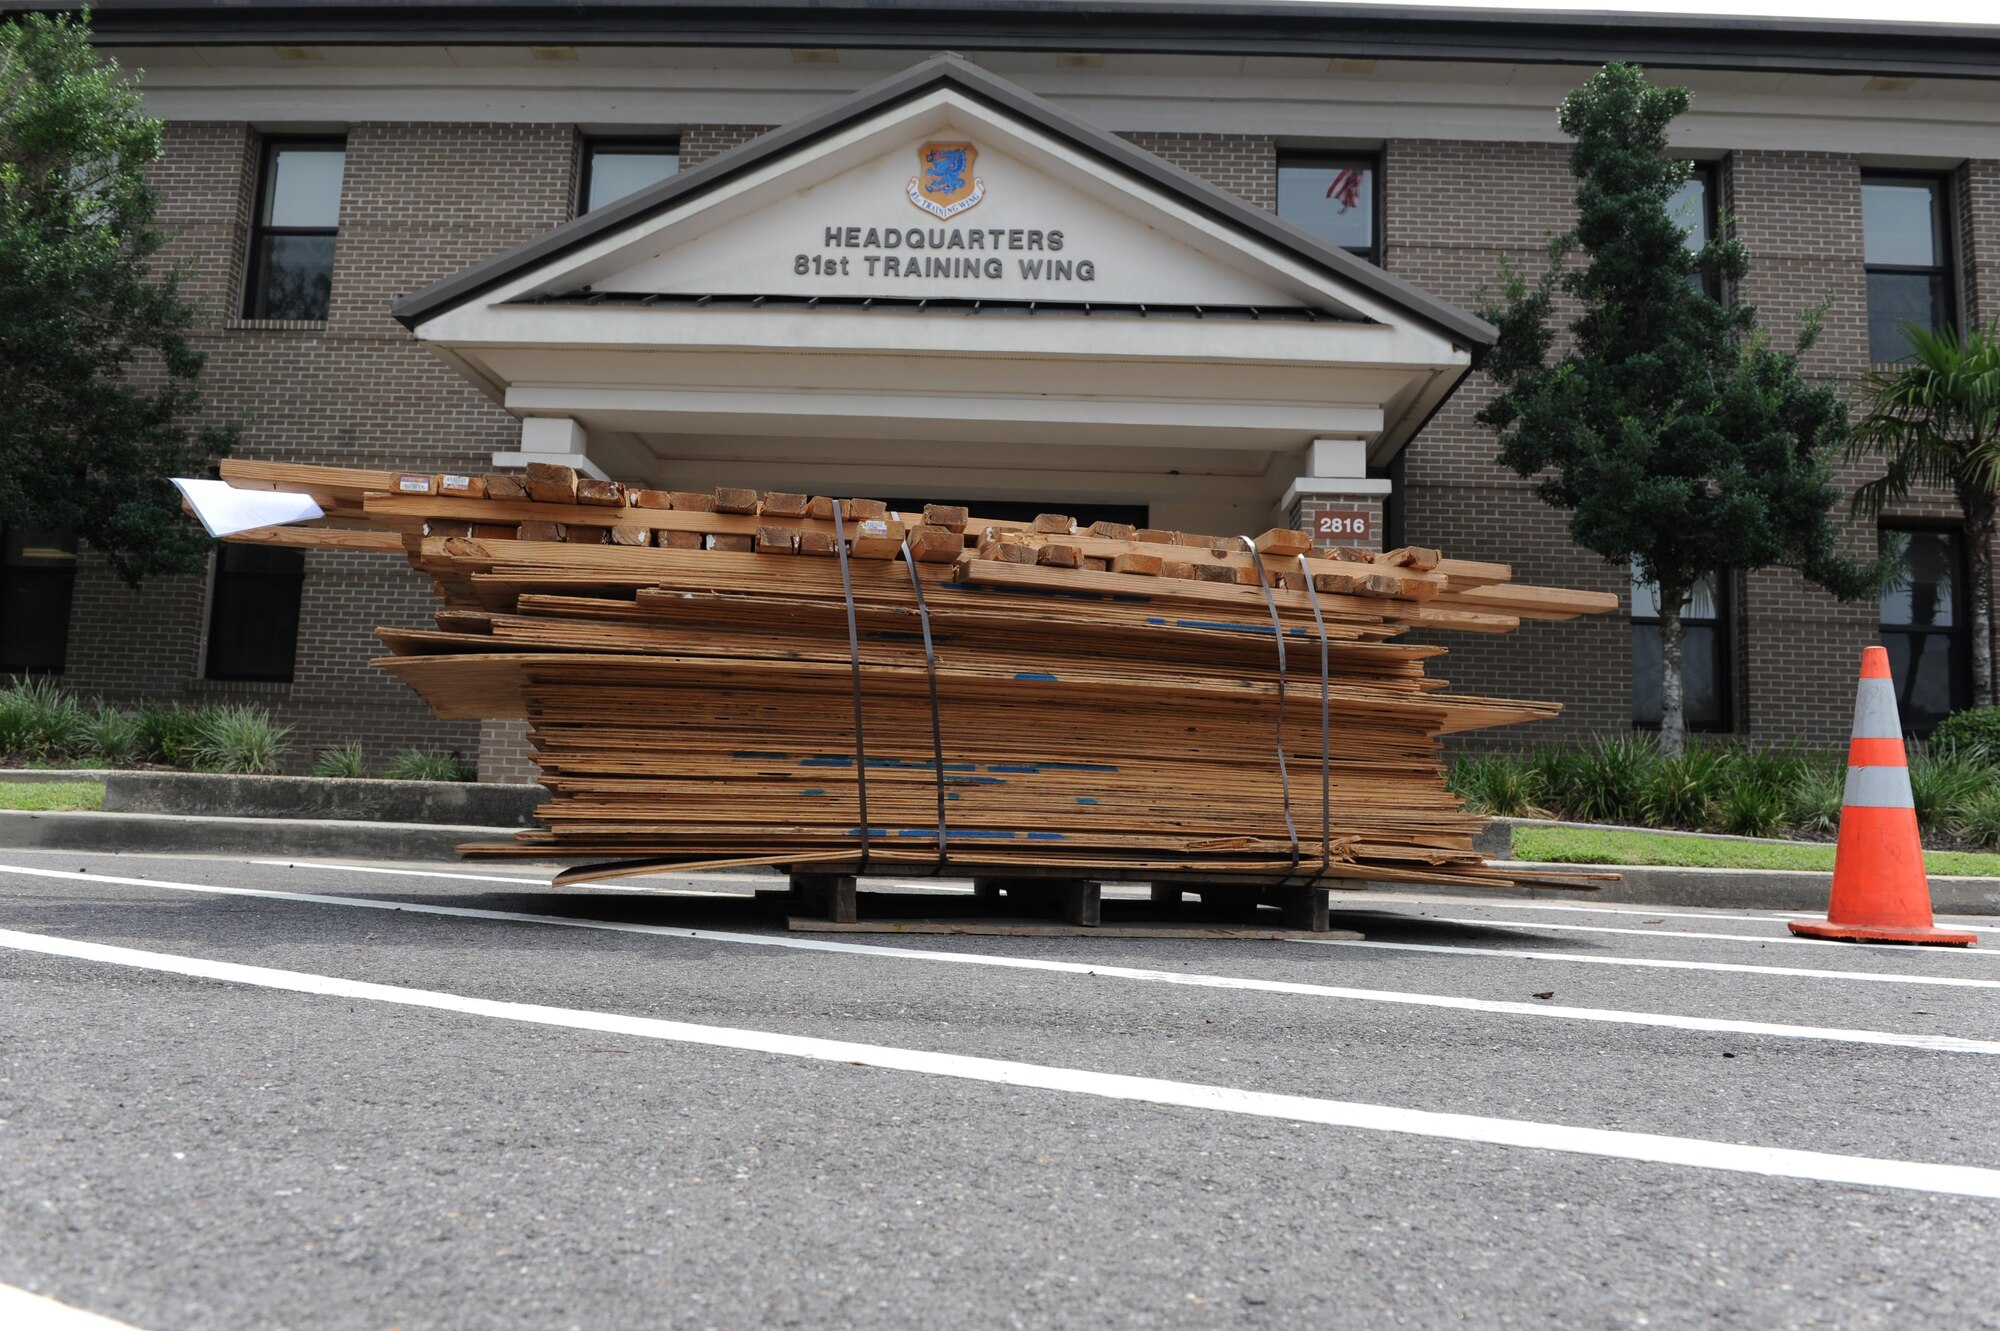 A pallet of boarding materials are placed in front of the 81st Training Wing headquarters building for securing doors and windows during a hurricane exercise Aug. 3, 2016, on Keesler Air Force Base, Miss. The purpose of the exercise was to prepare Keesler for the current hurricane season. (U.S. Air Force photo by Kemberly Groue/Released)